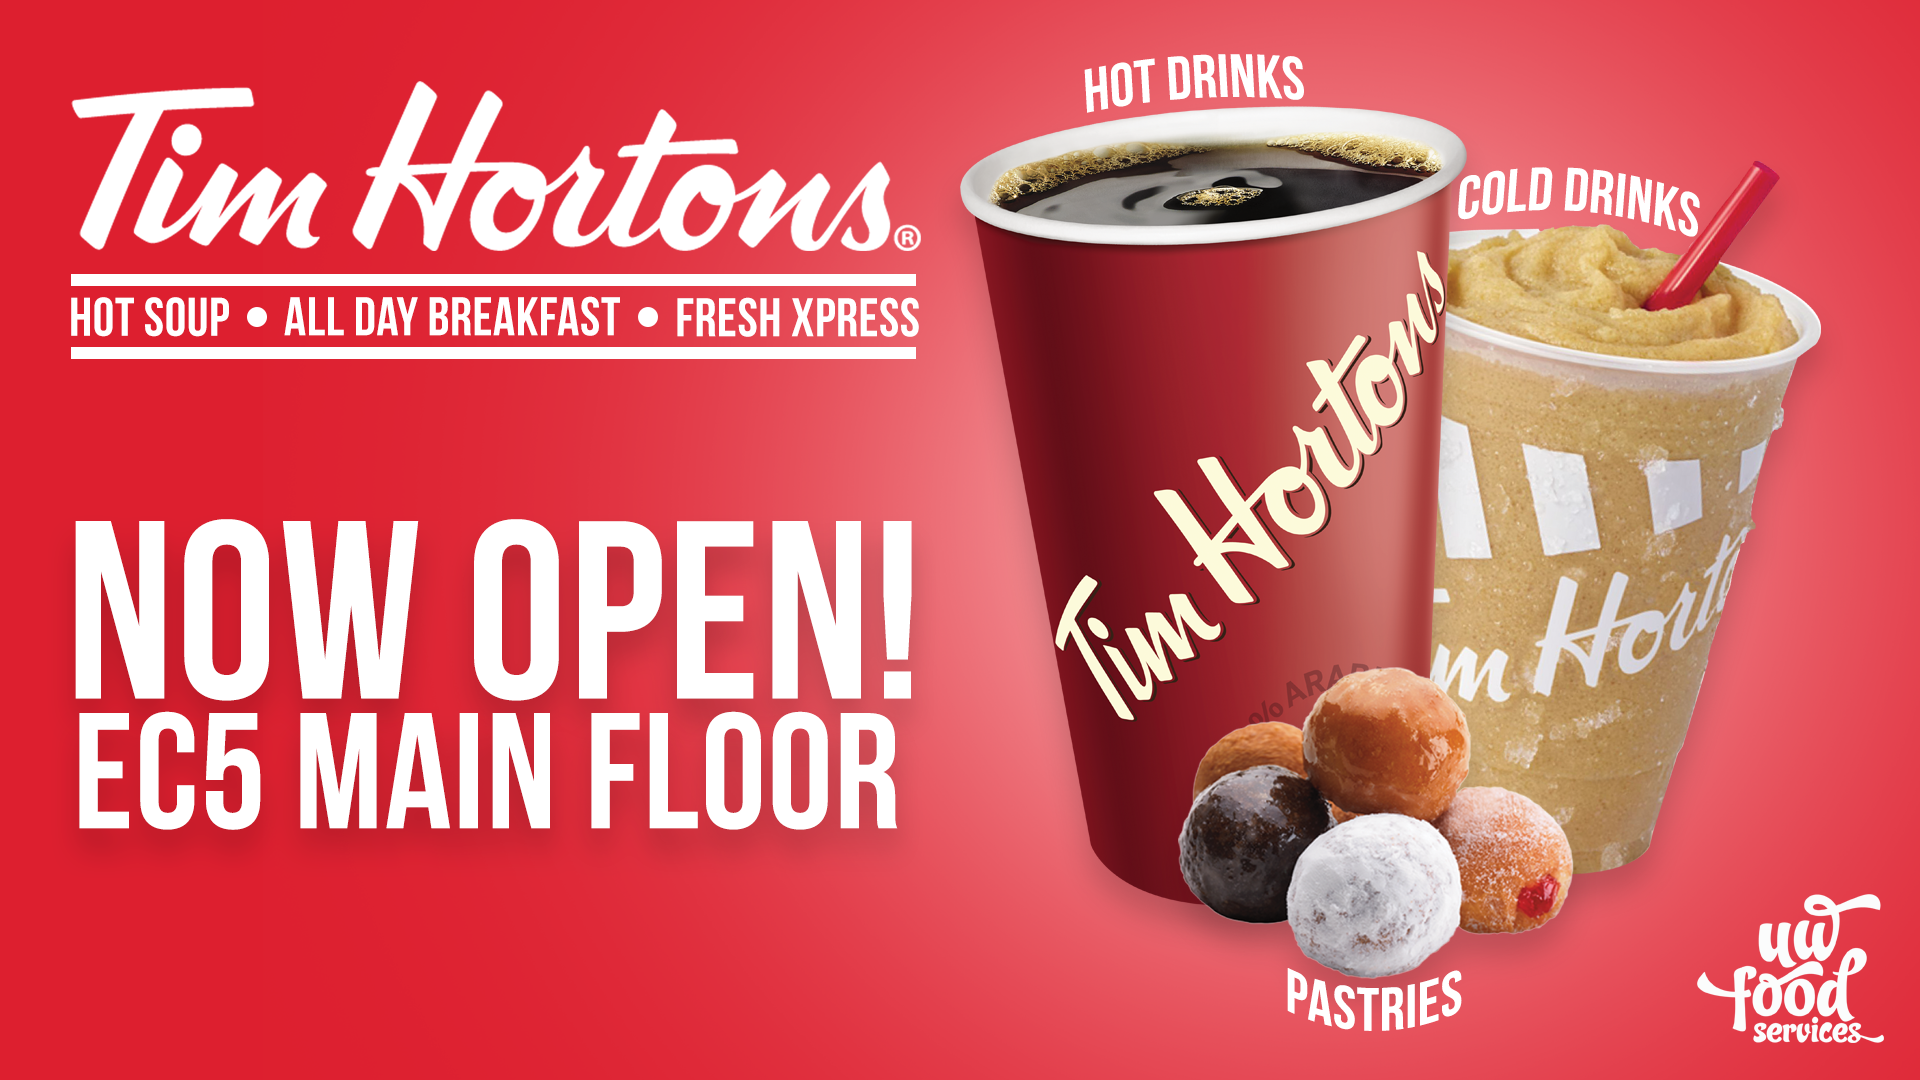 Tim Hortons now open poster